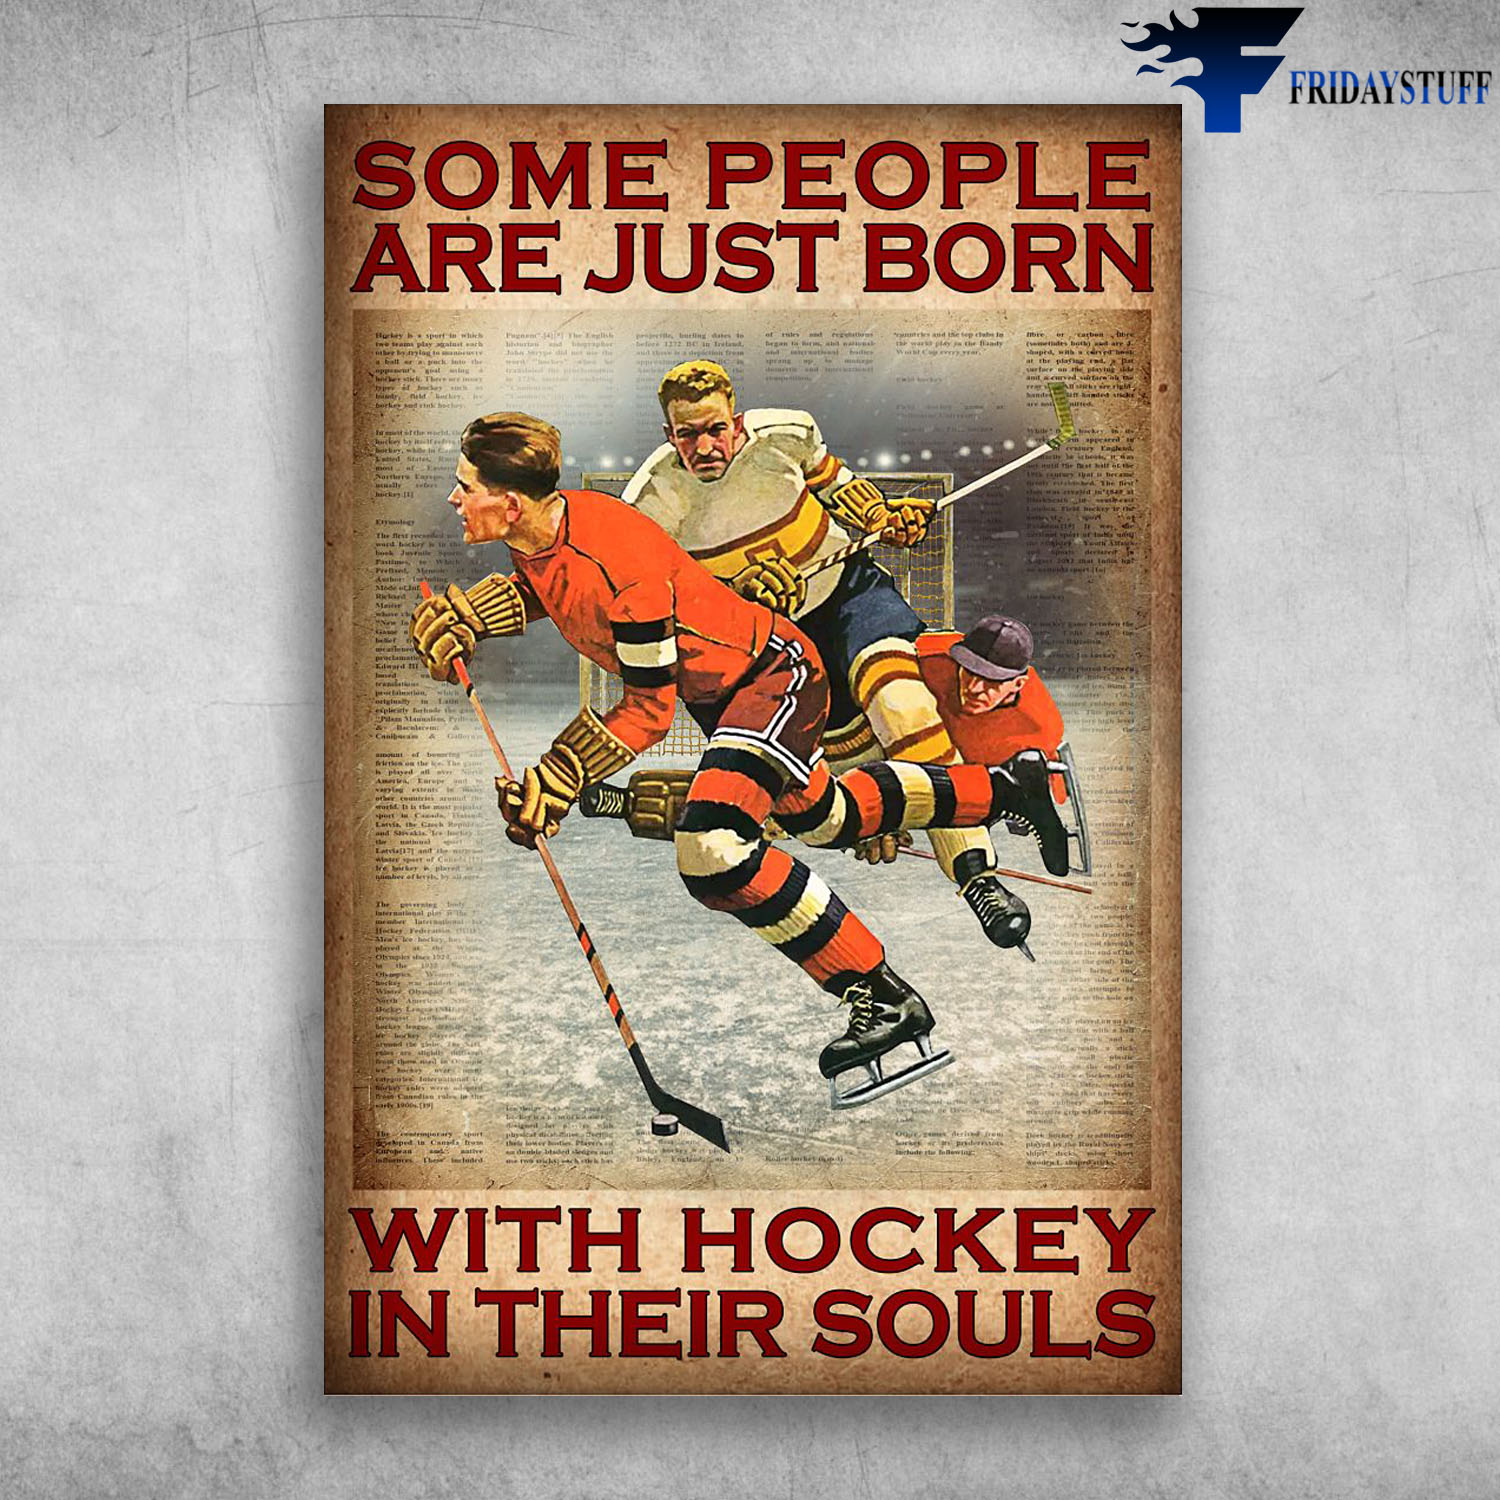 Hockey Player - Some People Are Just Born Wirh Hockey In Their Souls